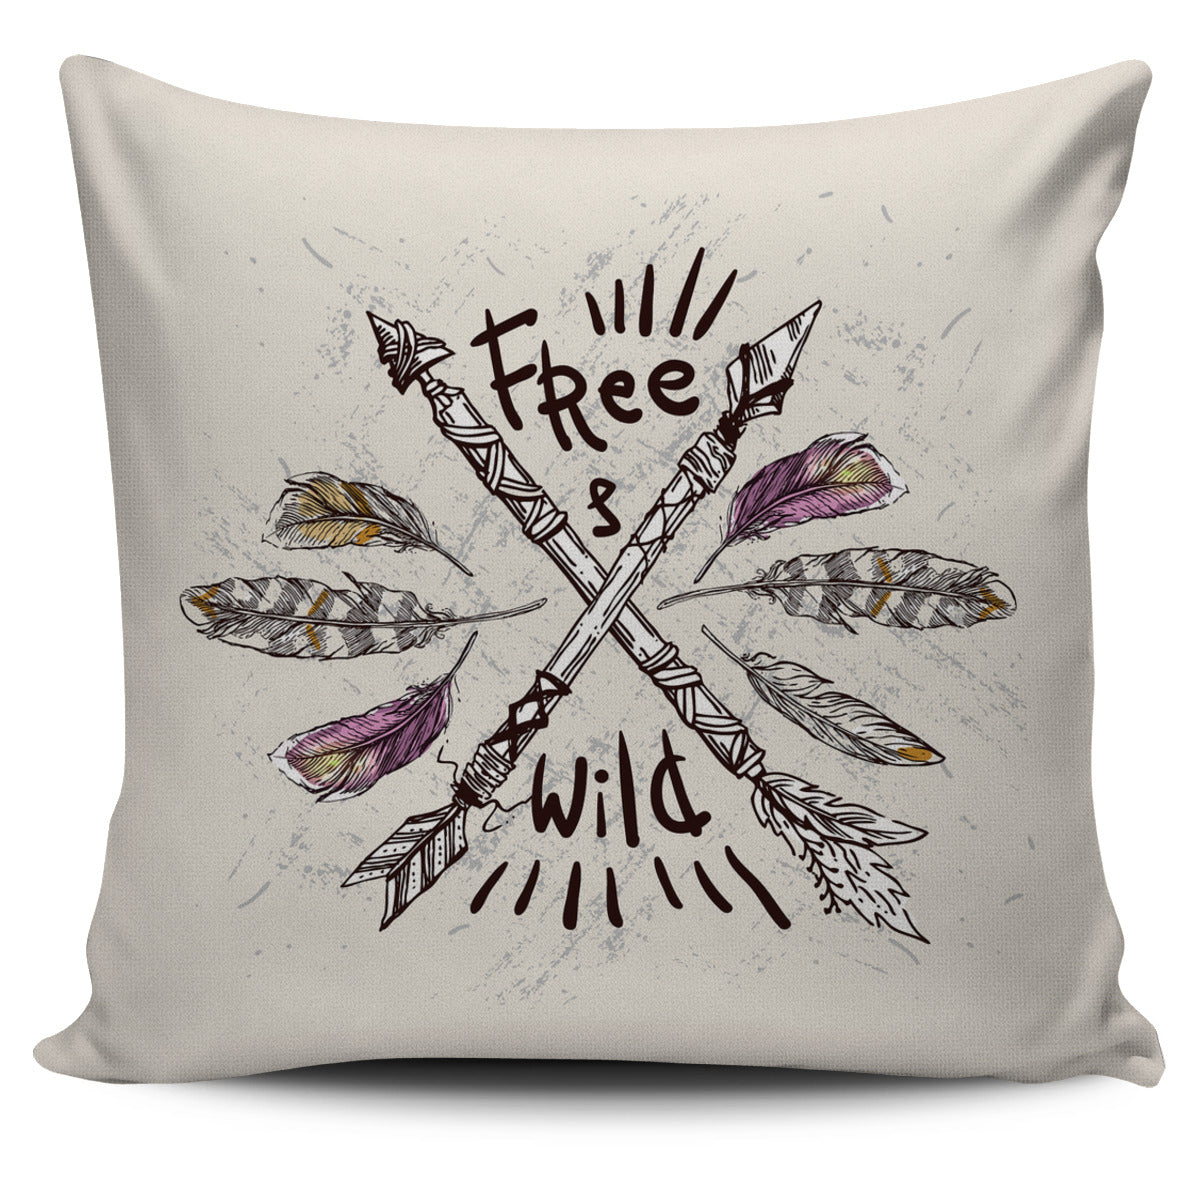 Free And Wild Pillow Cover